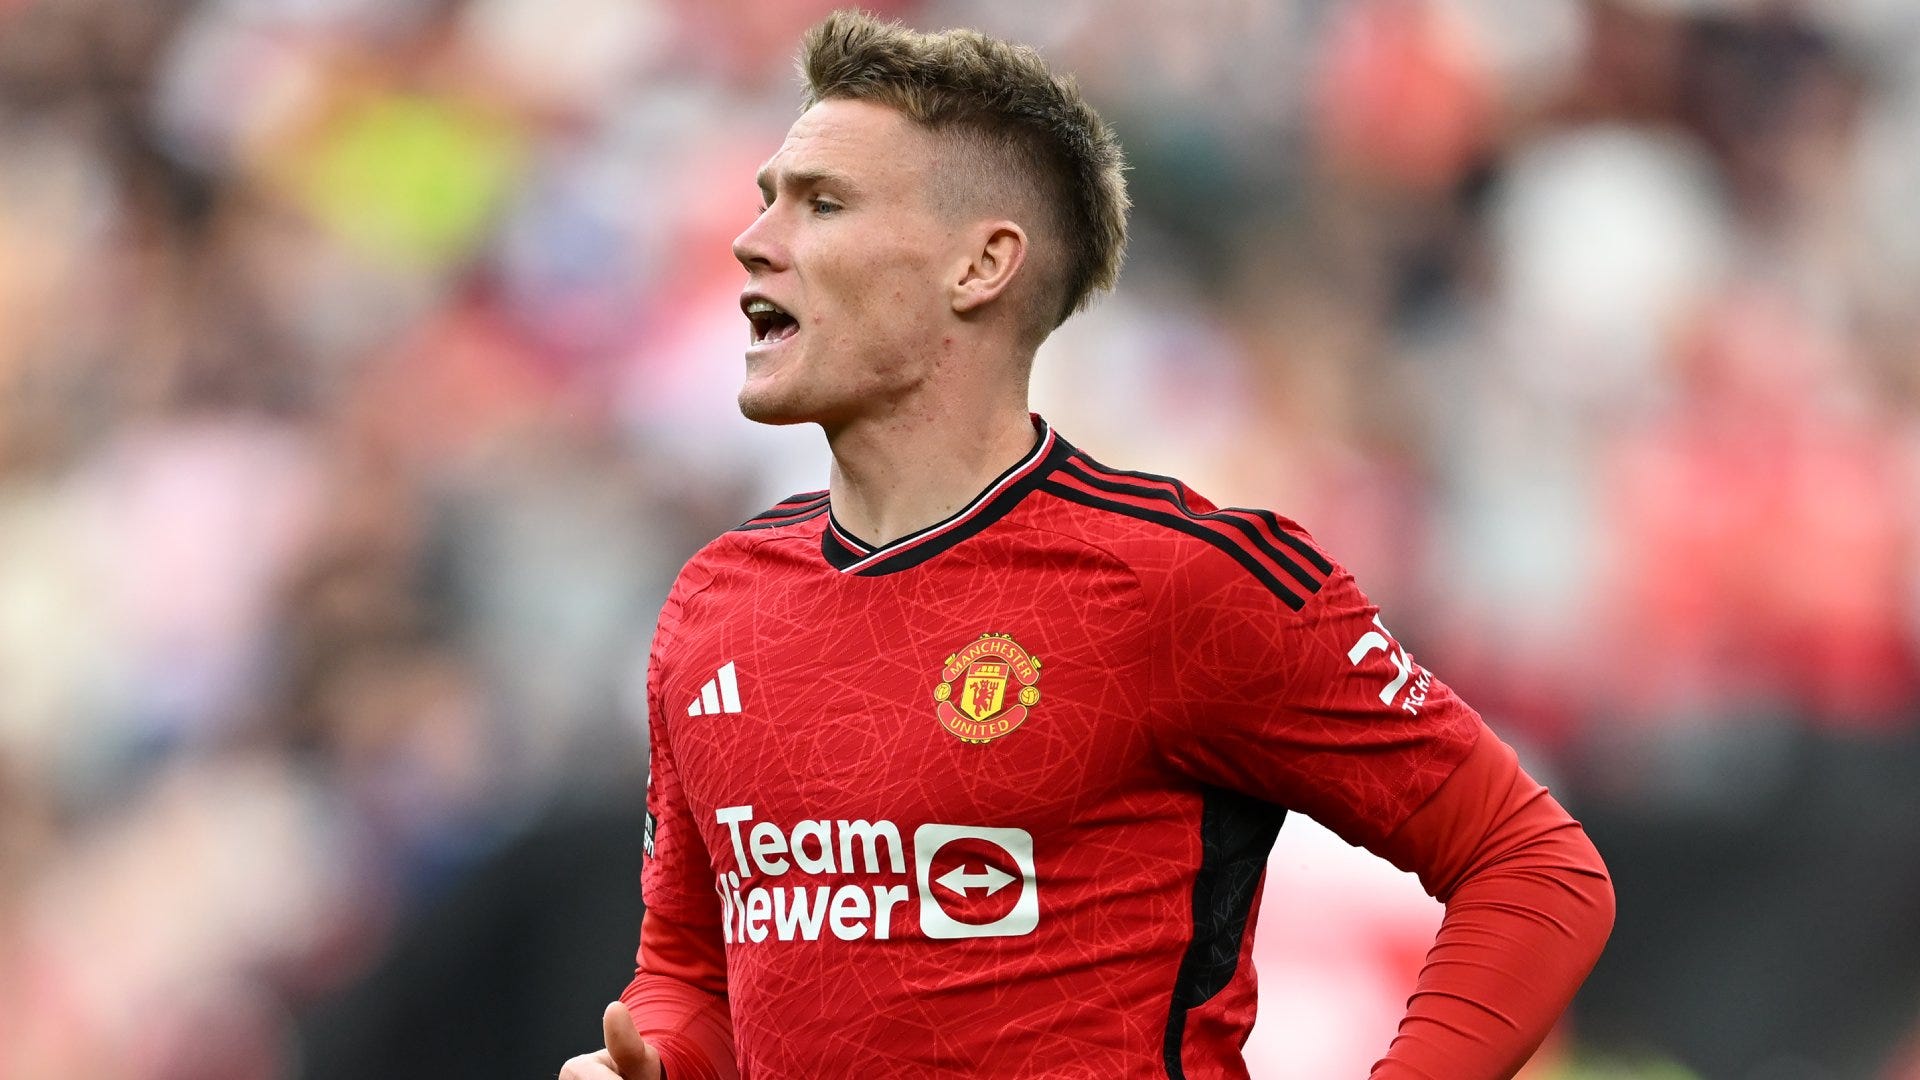 Manchester United vs Brighton Live stream, TV channel, kick-off time and where to watch Goal UK